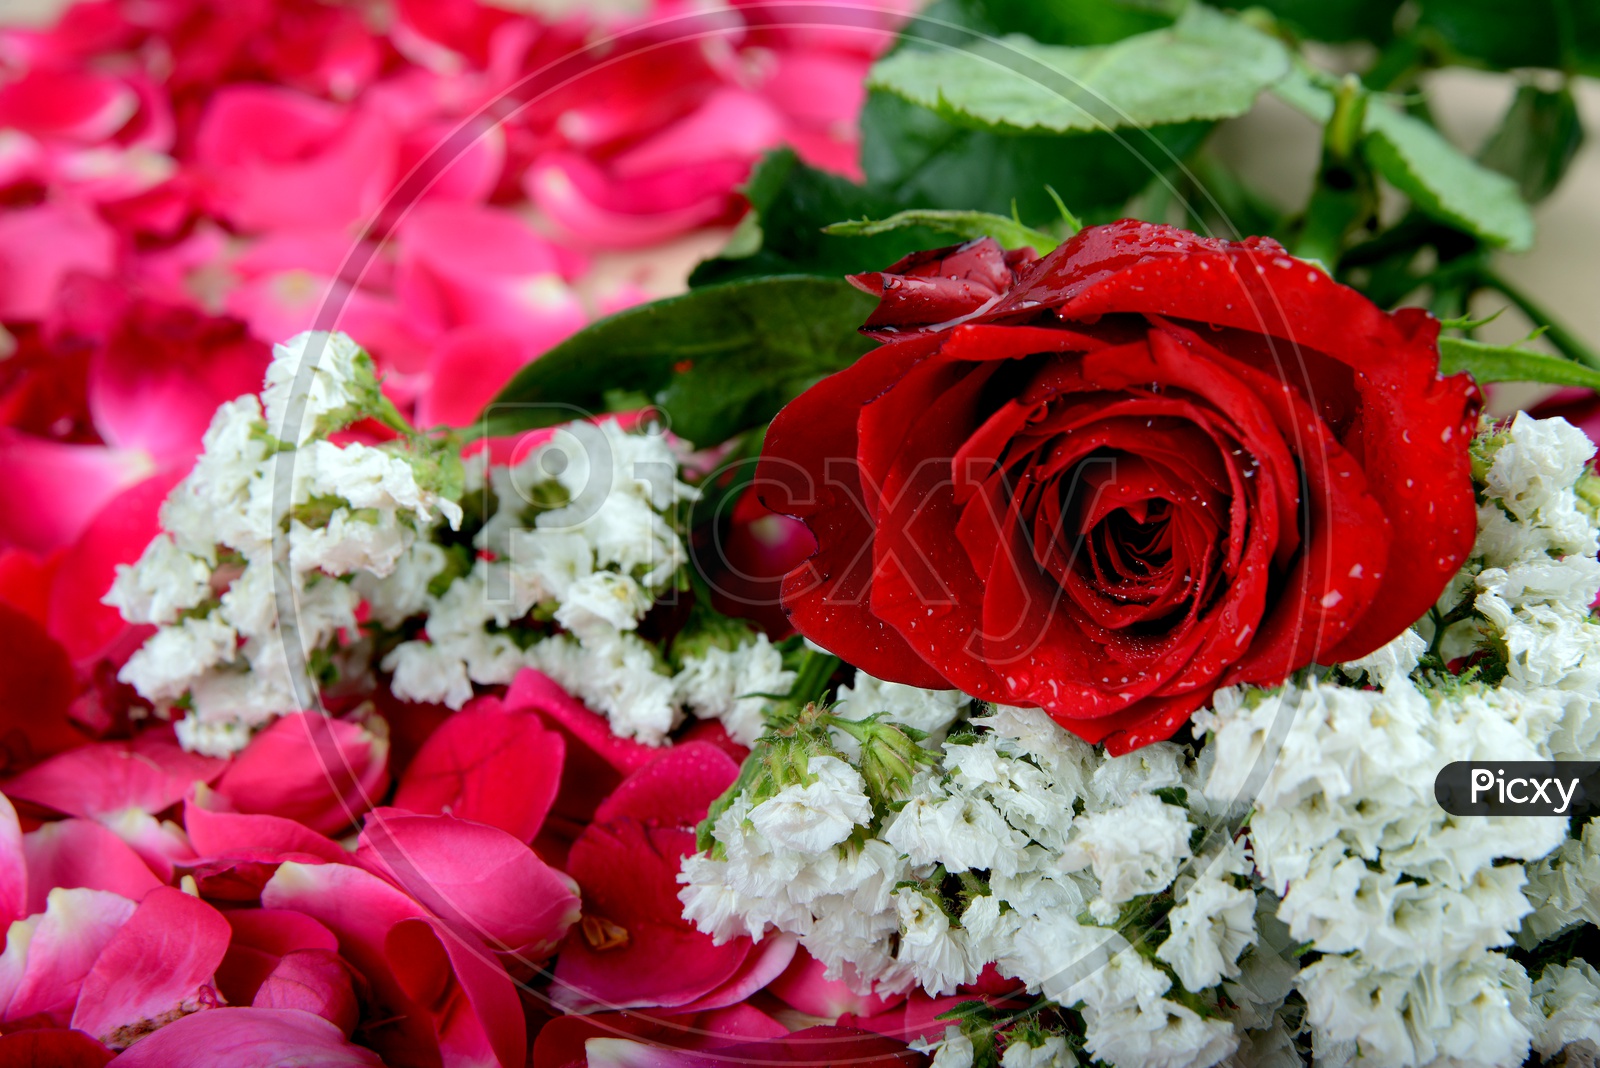 Close up of Red rose flower with red petals and white flowers